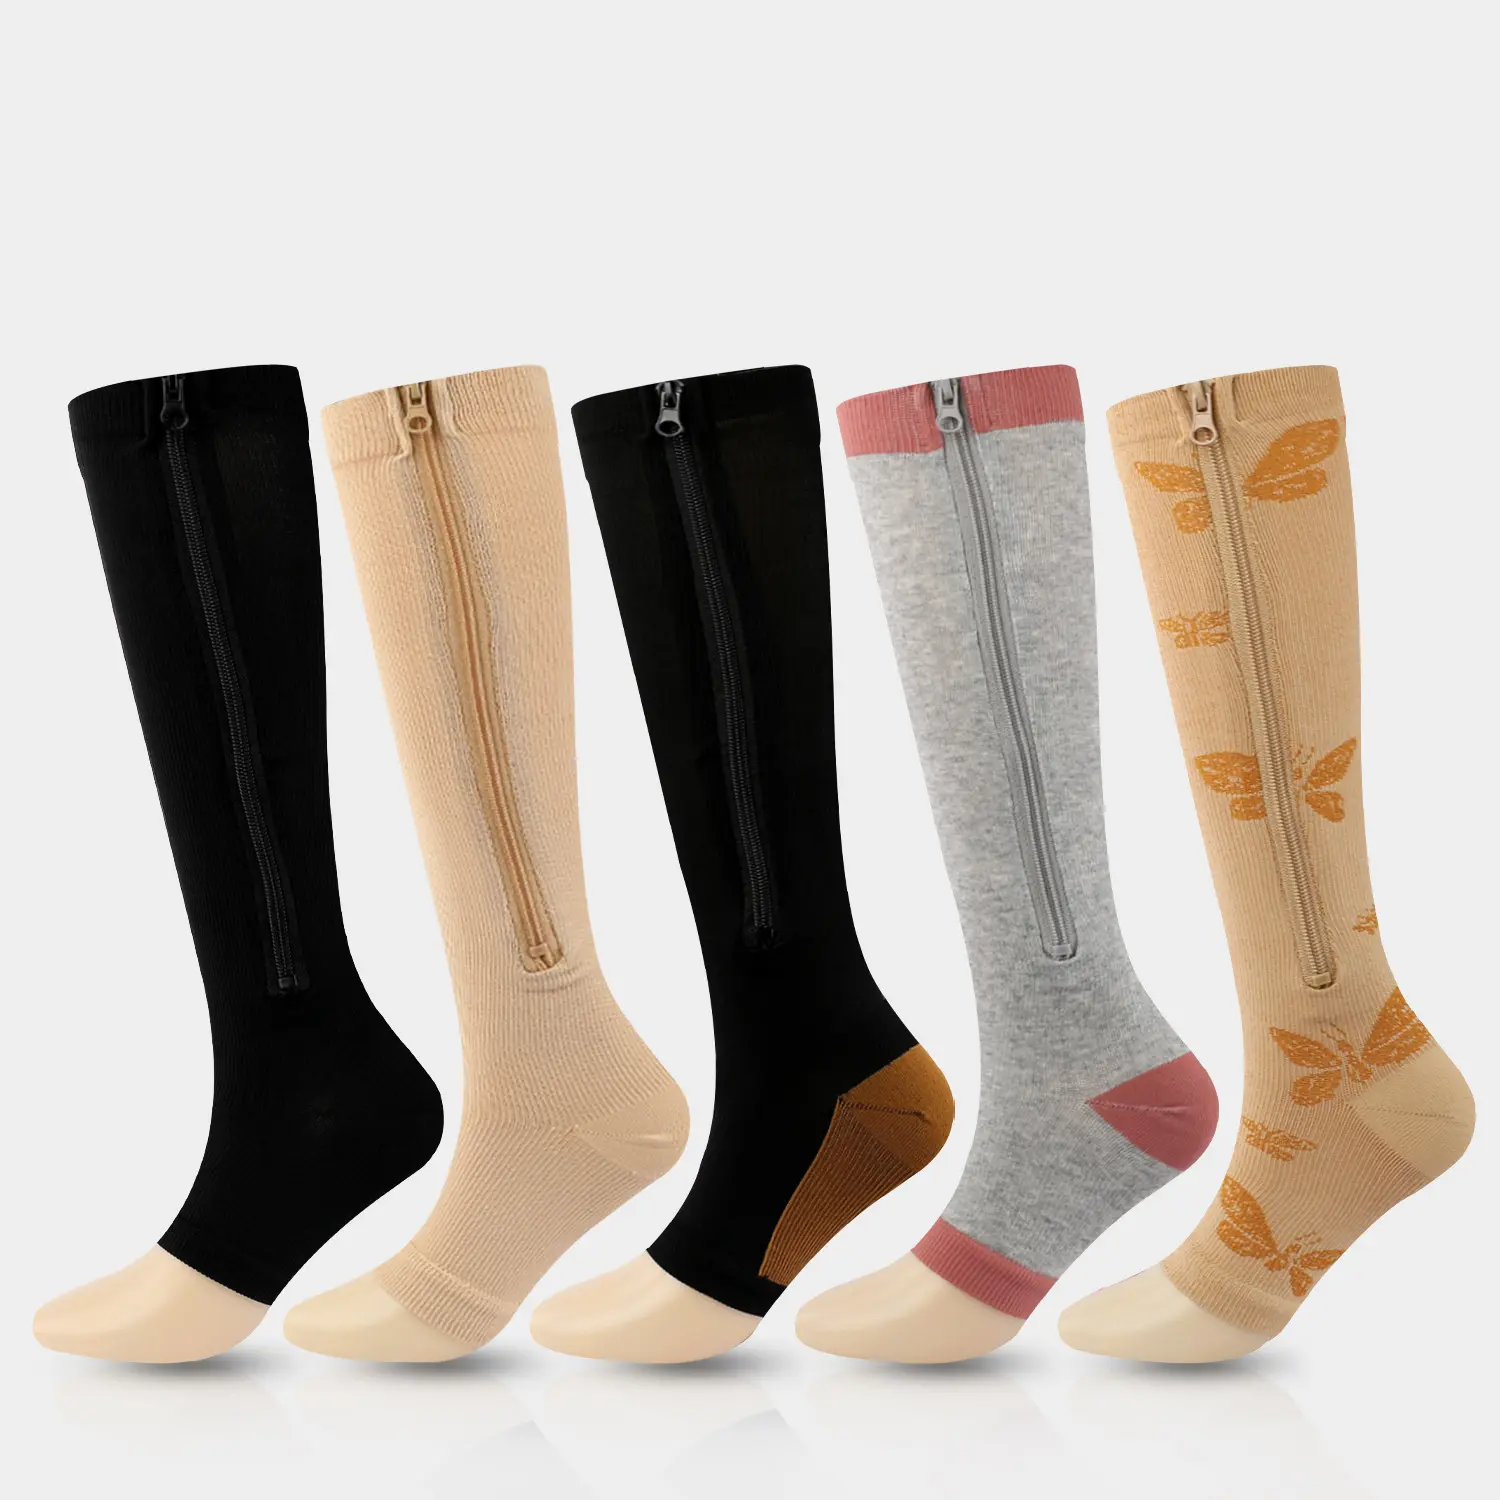 Hot Sale Men and Women Different Size Nylon Compression Socks Sports Socks High Quality Custom Your Own Socks